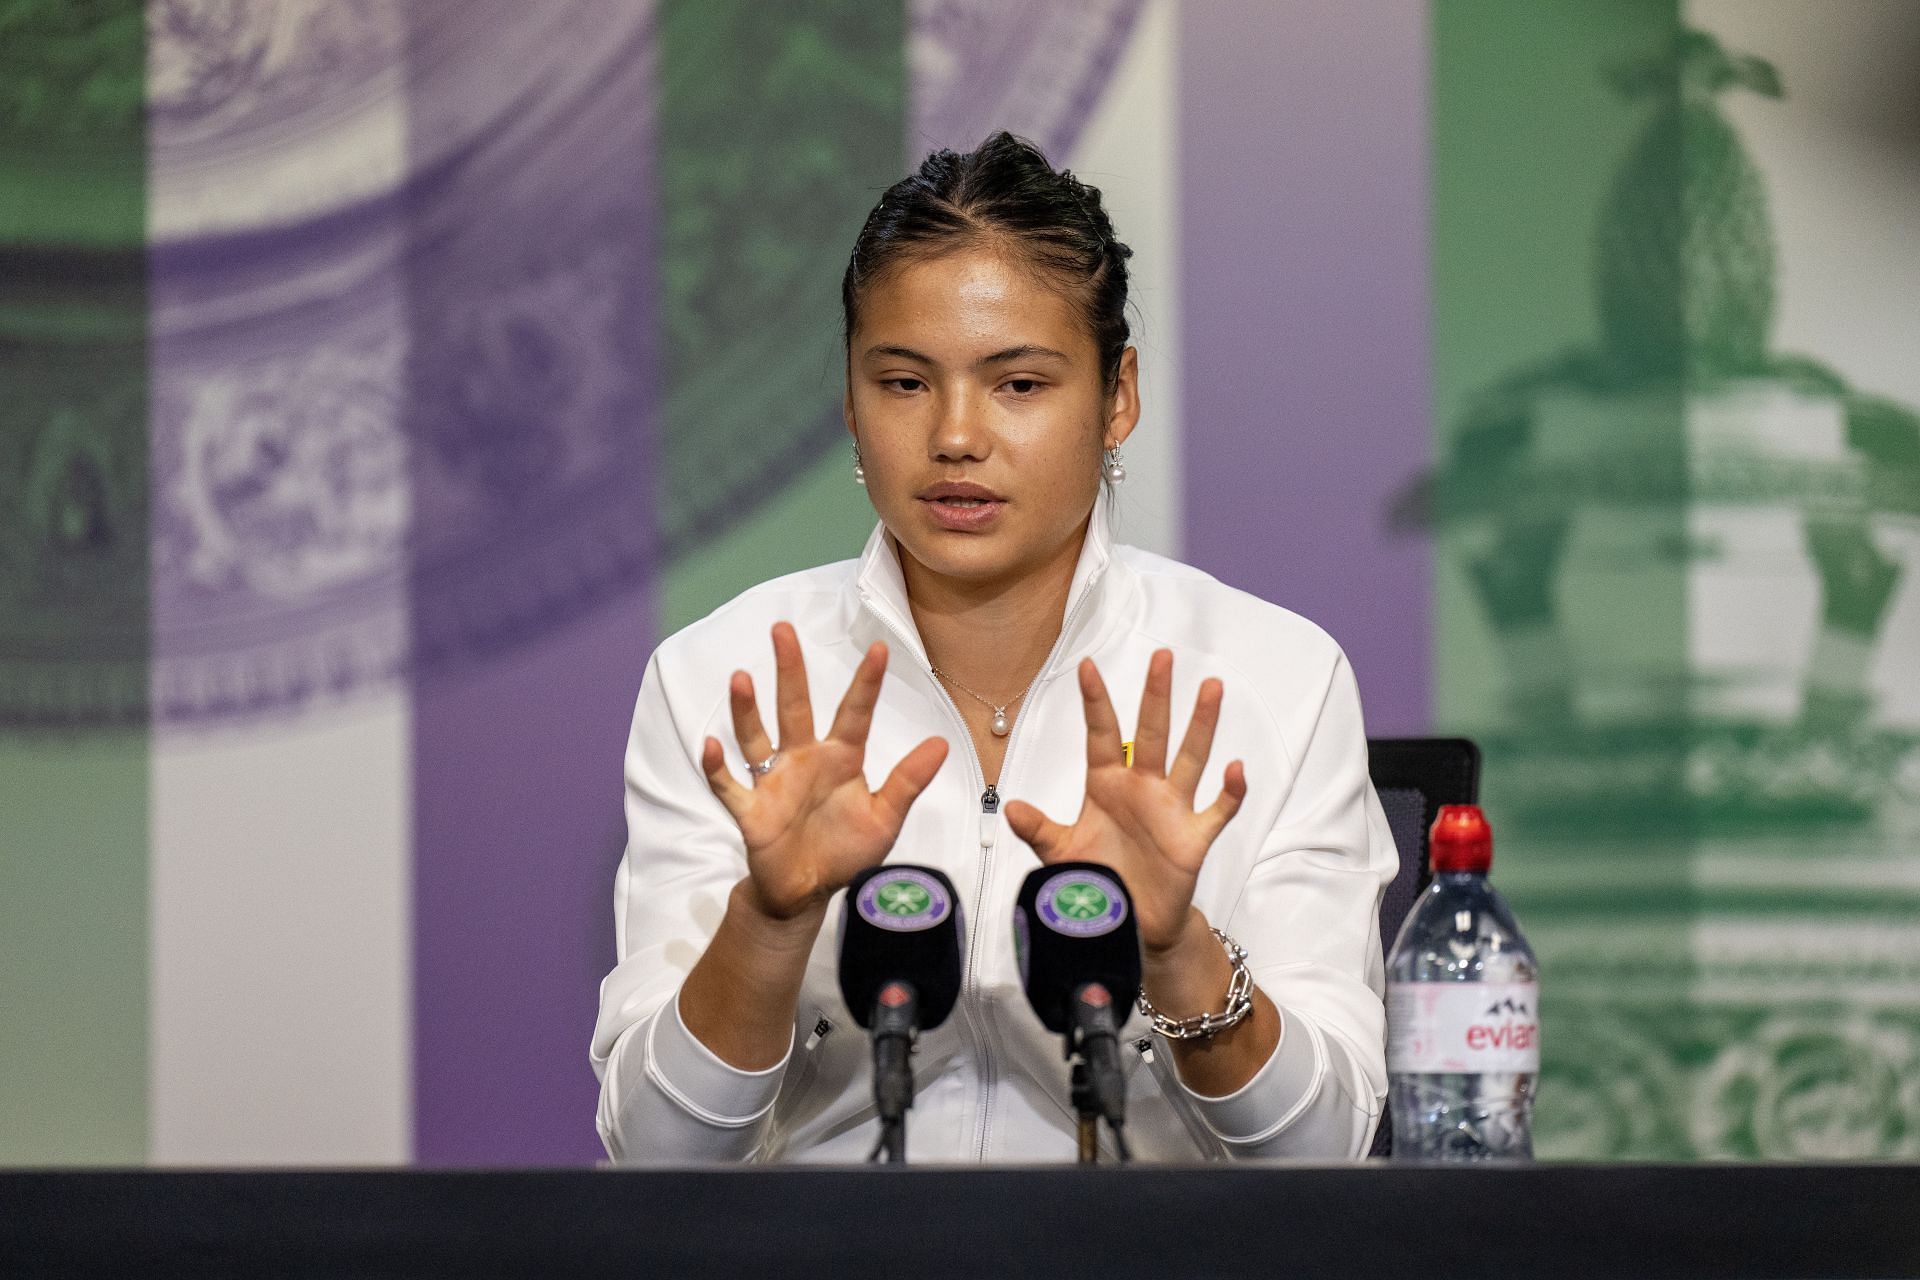 Emma Raducanu pictured during a press conference at the 2022 Wimbledon Championships.